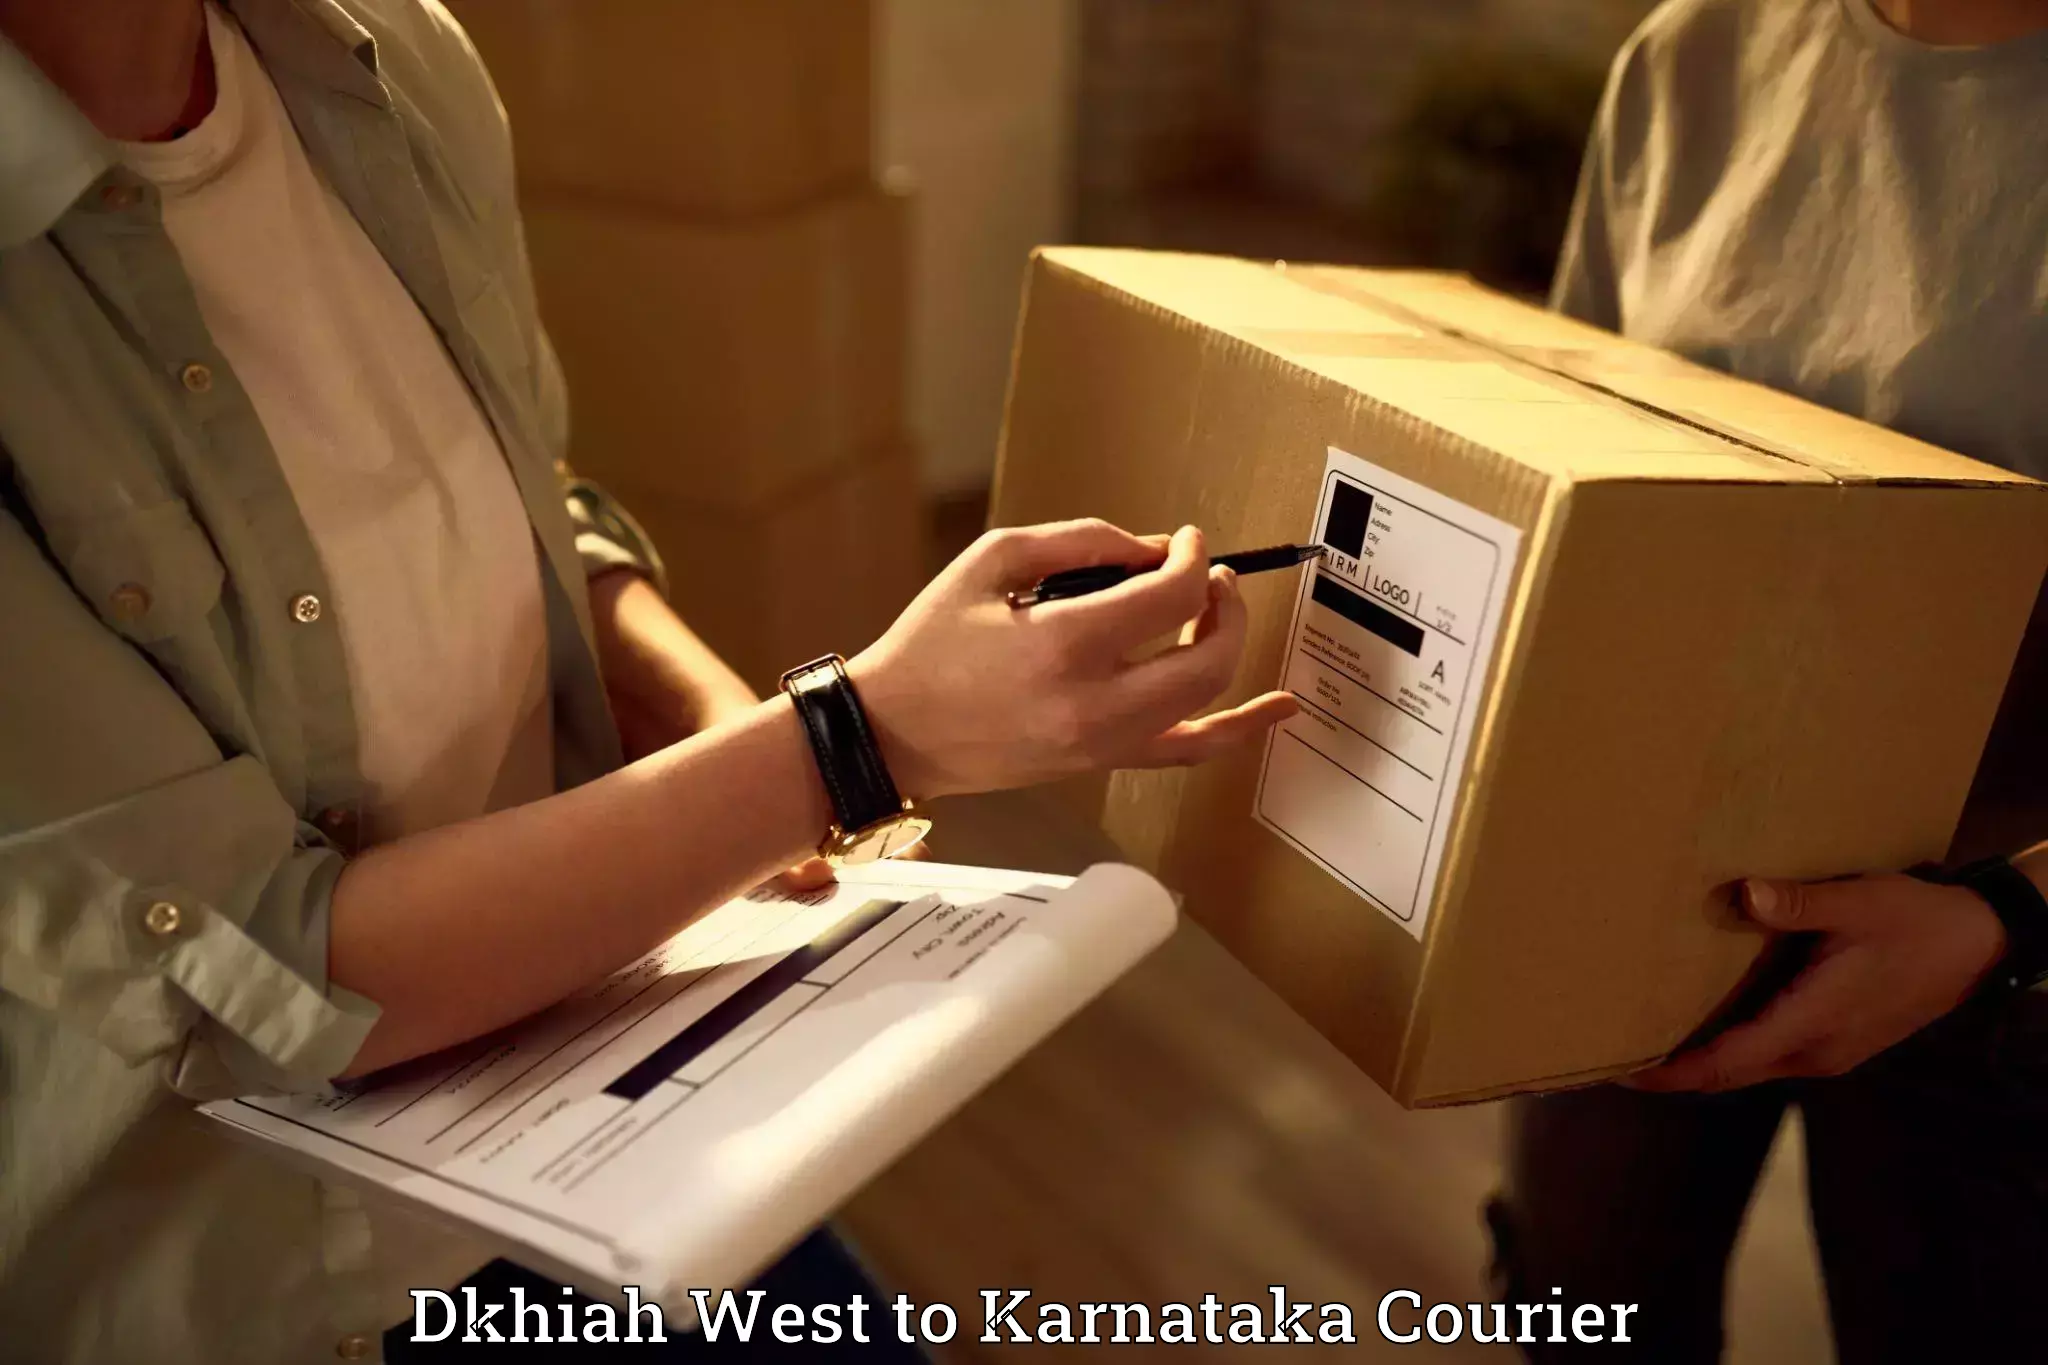 Reliable goods transport in Dkhiah West to Yelburga